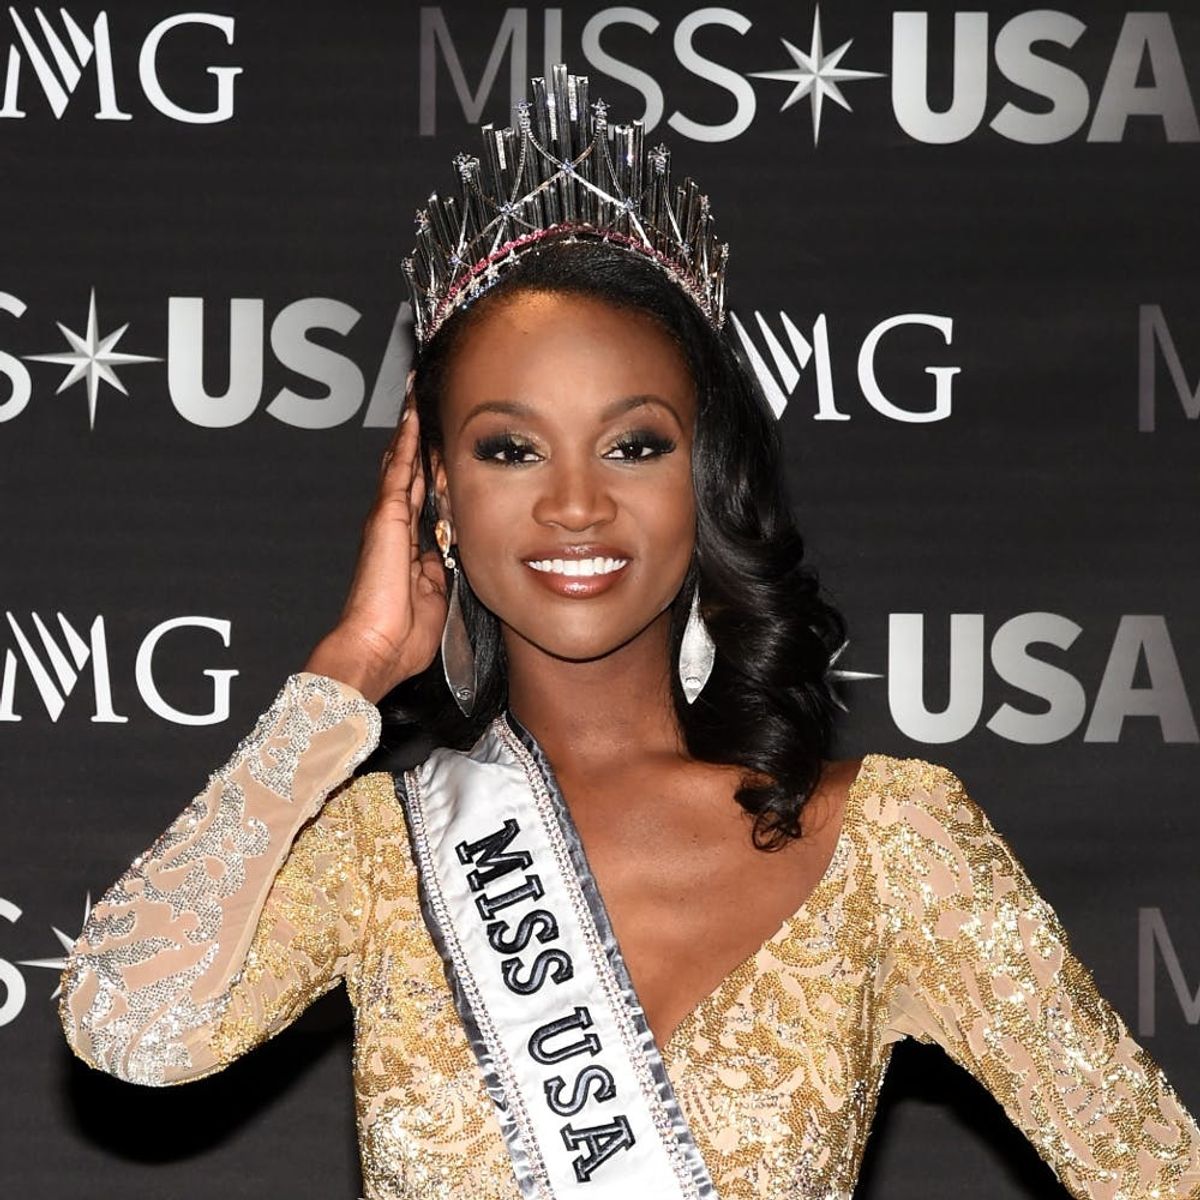 Here’s Why Everyone Is Freaking Out Over the New Miss USA